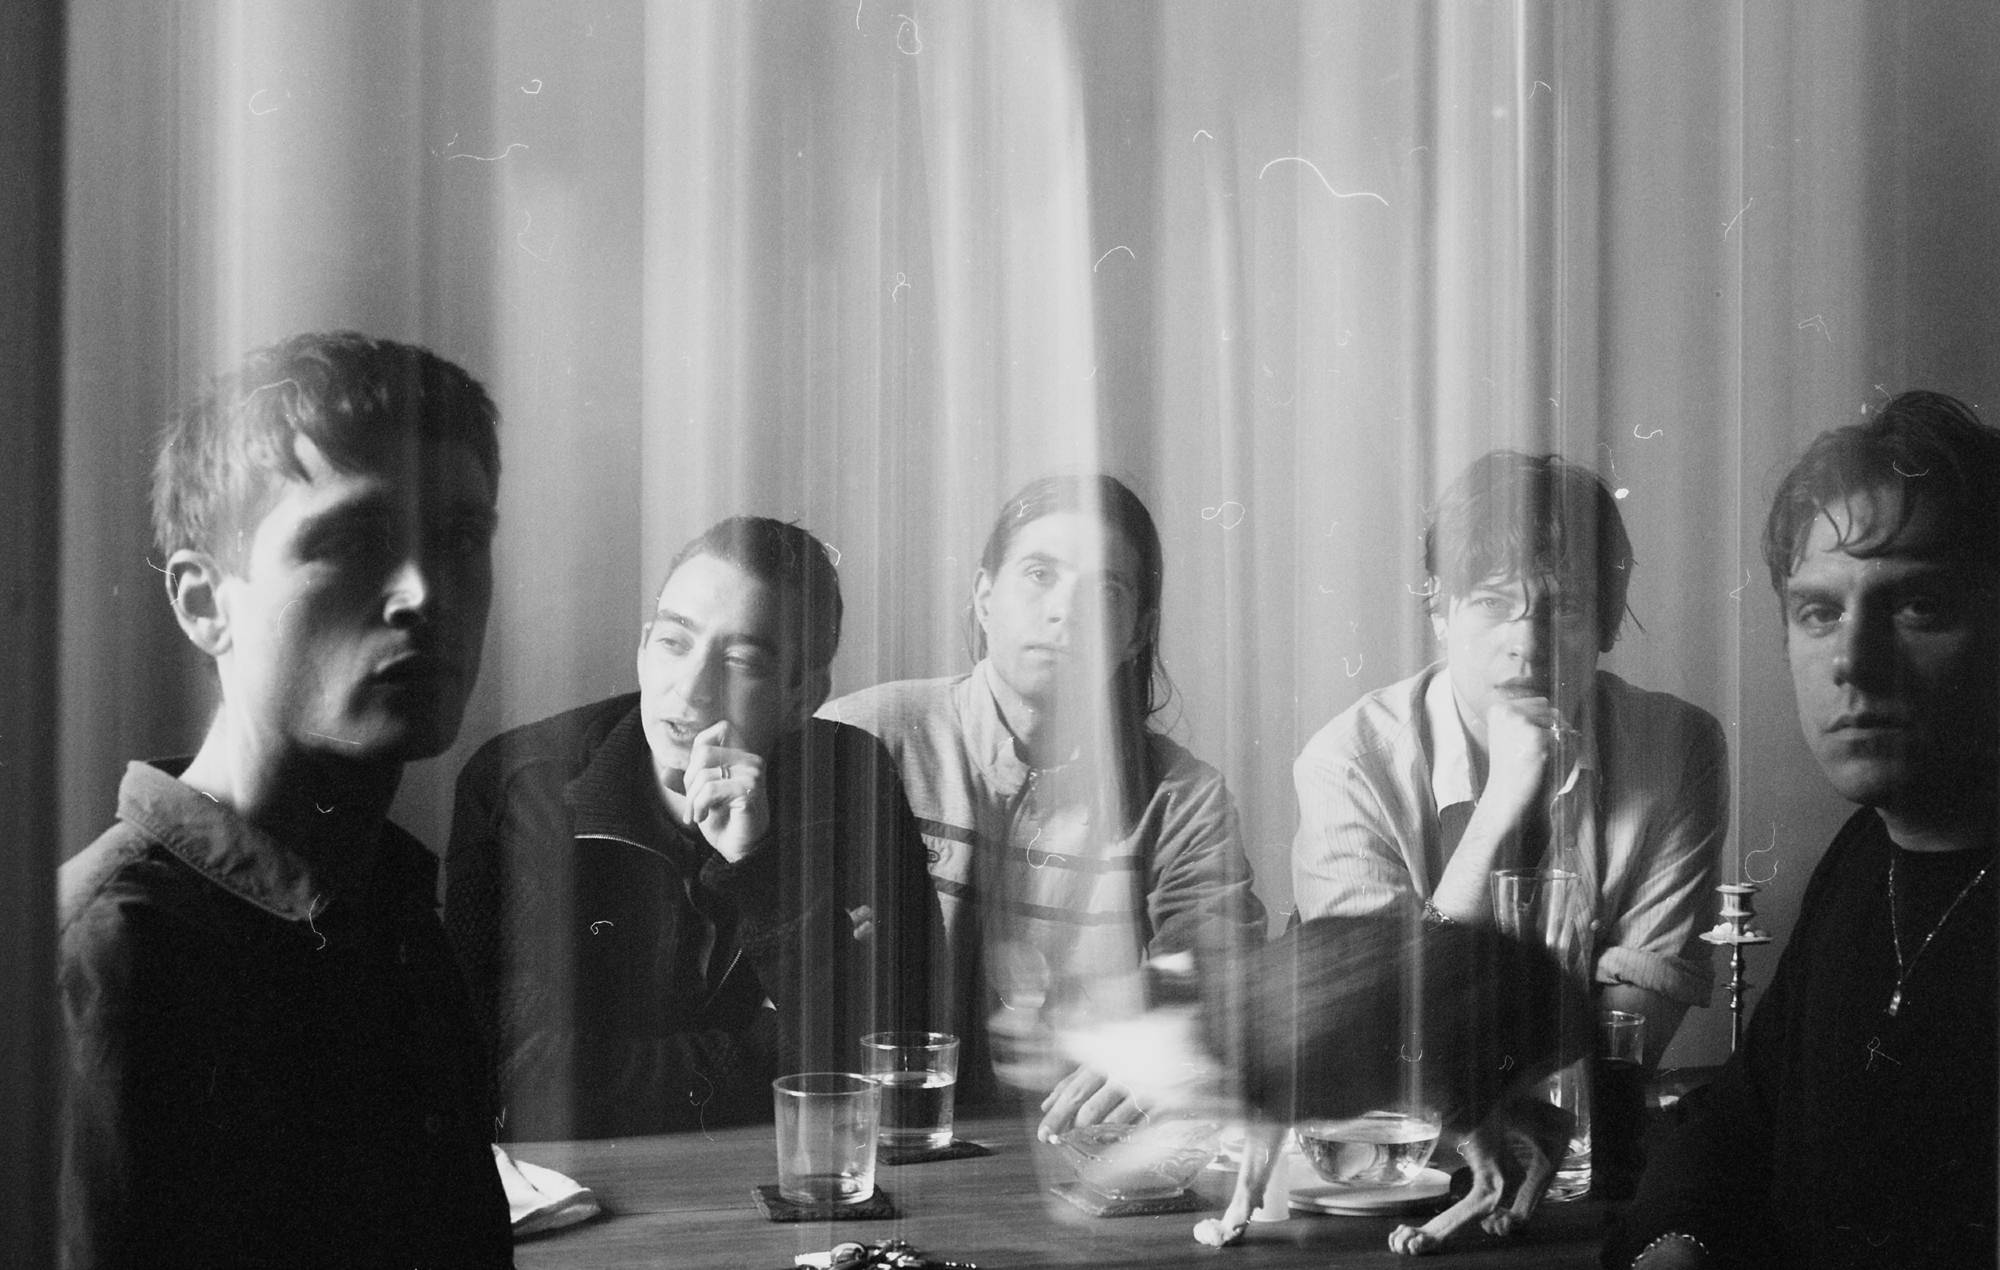 Iceage on growing up: “The longer you live, the more nuance gets added to the palette”